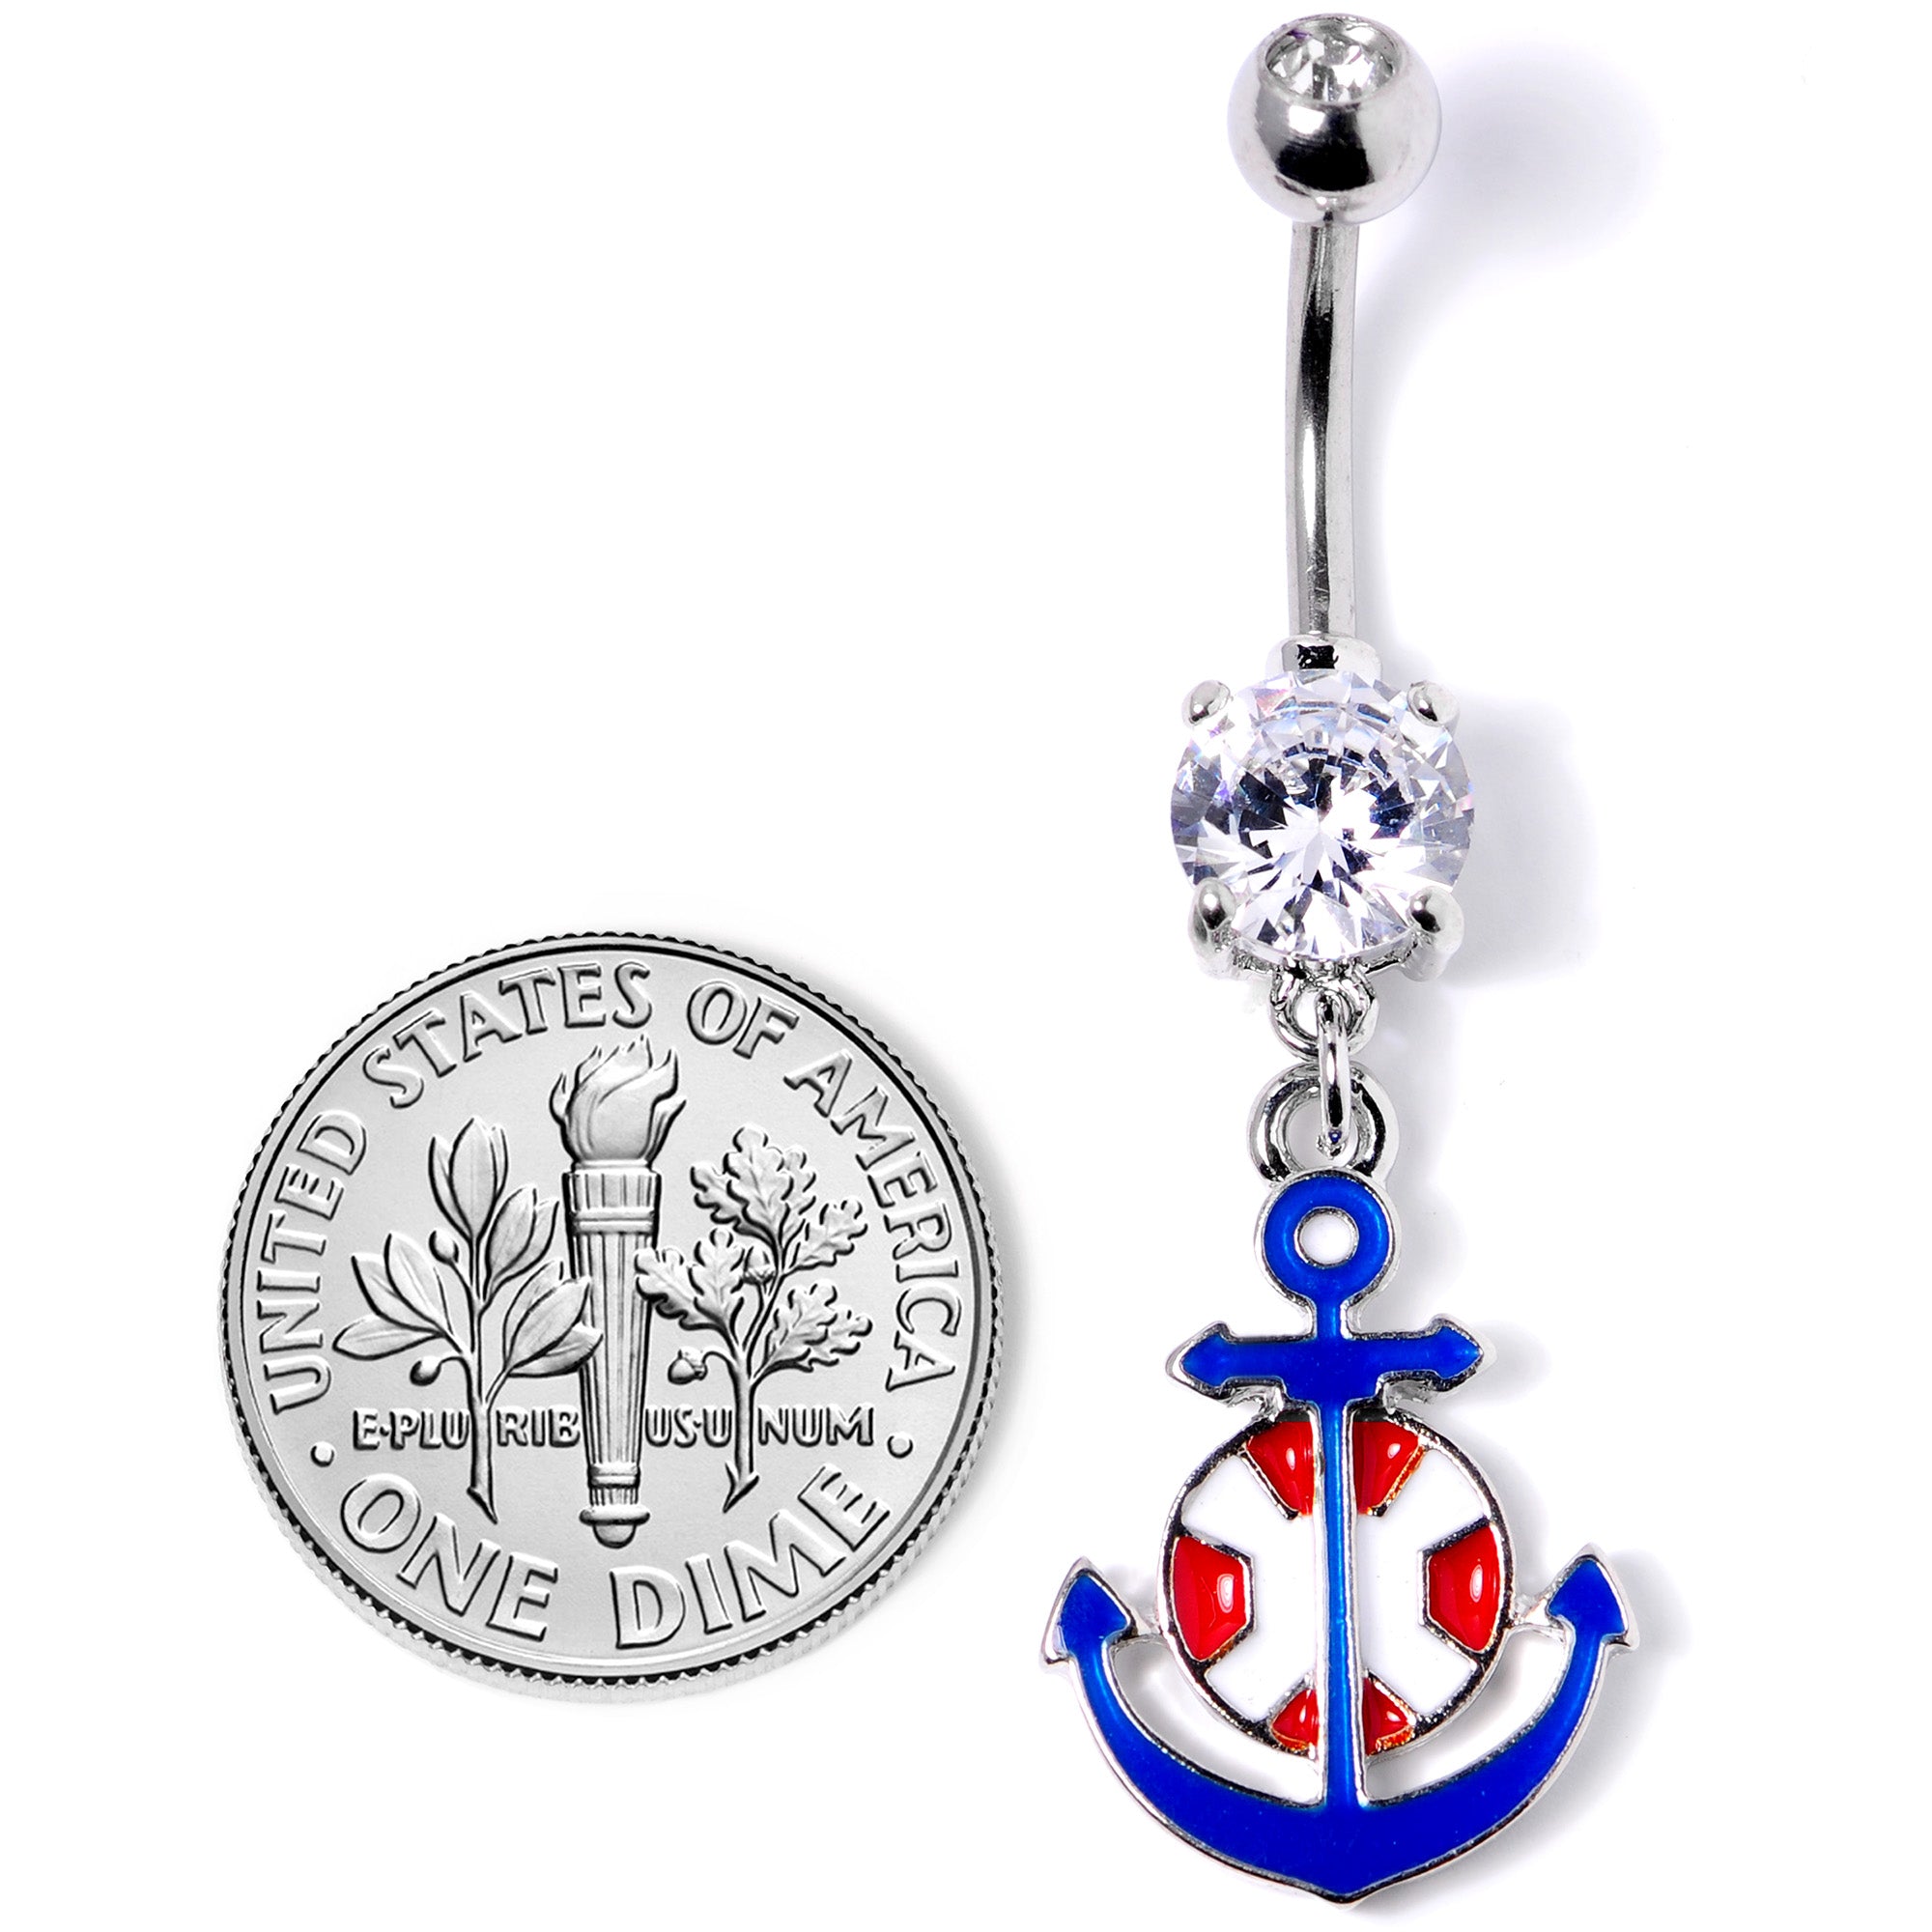 Clear Gem Blue Red Life Ring Anchor Nautical Belly Ring